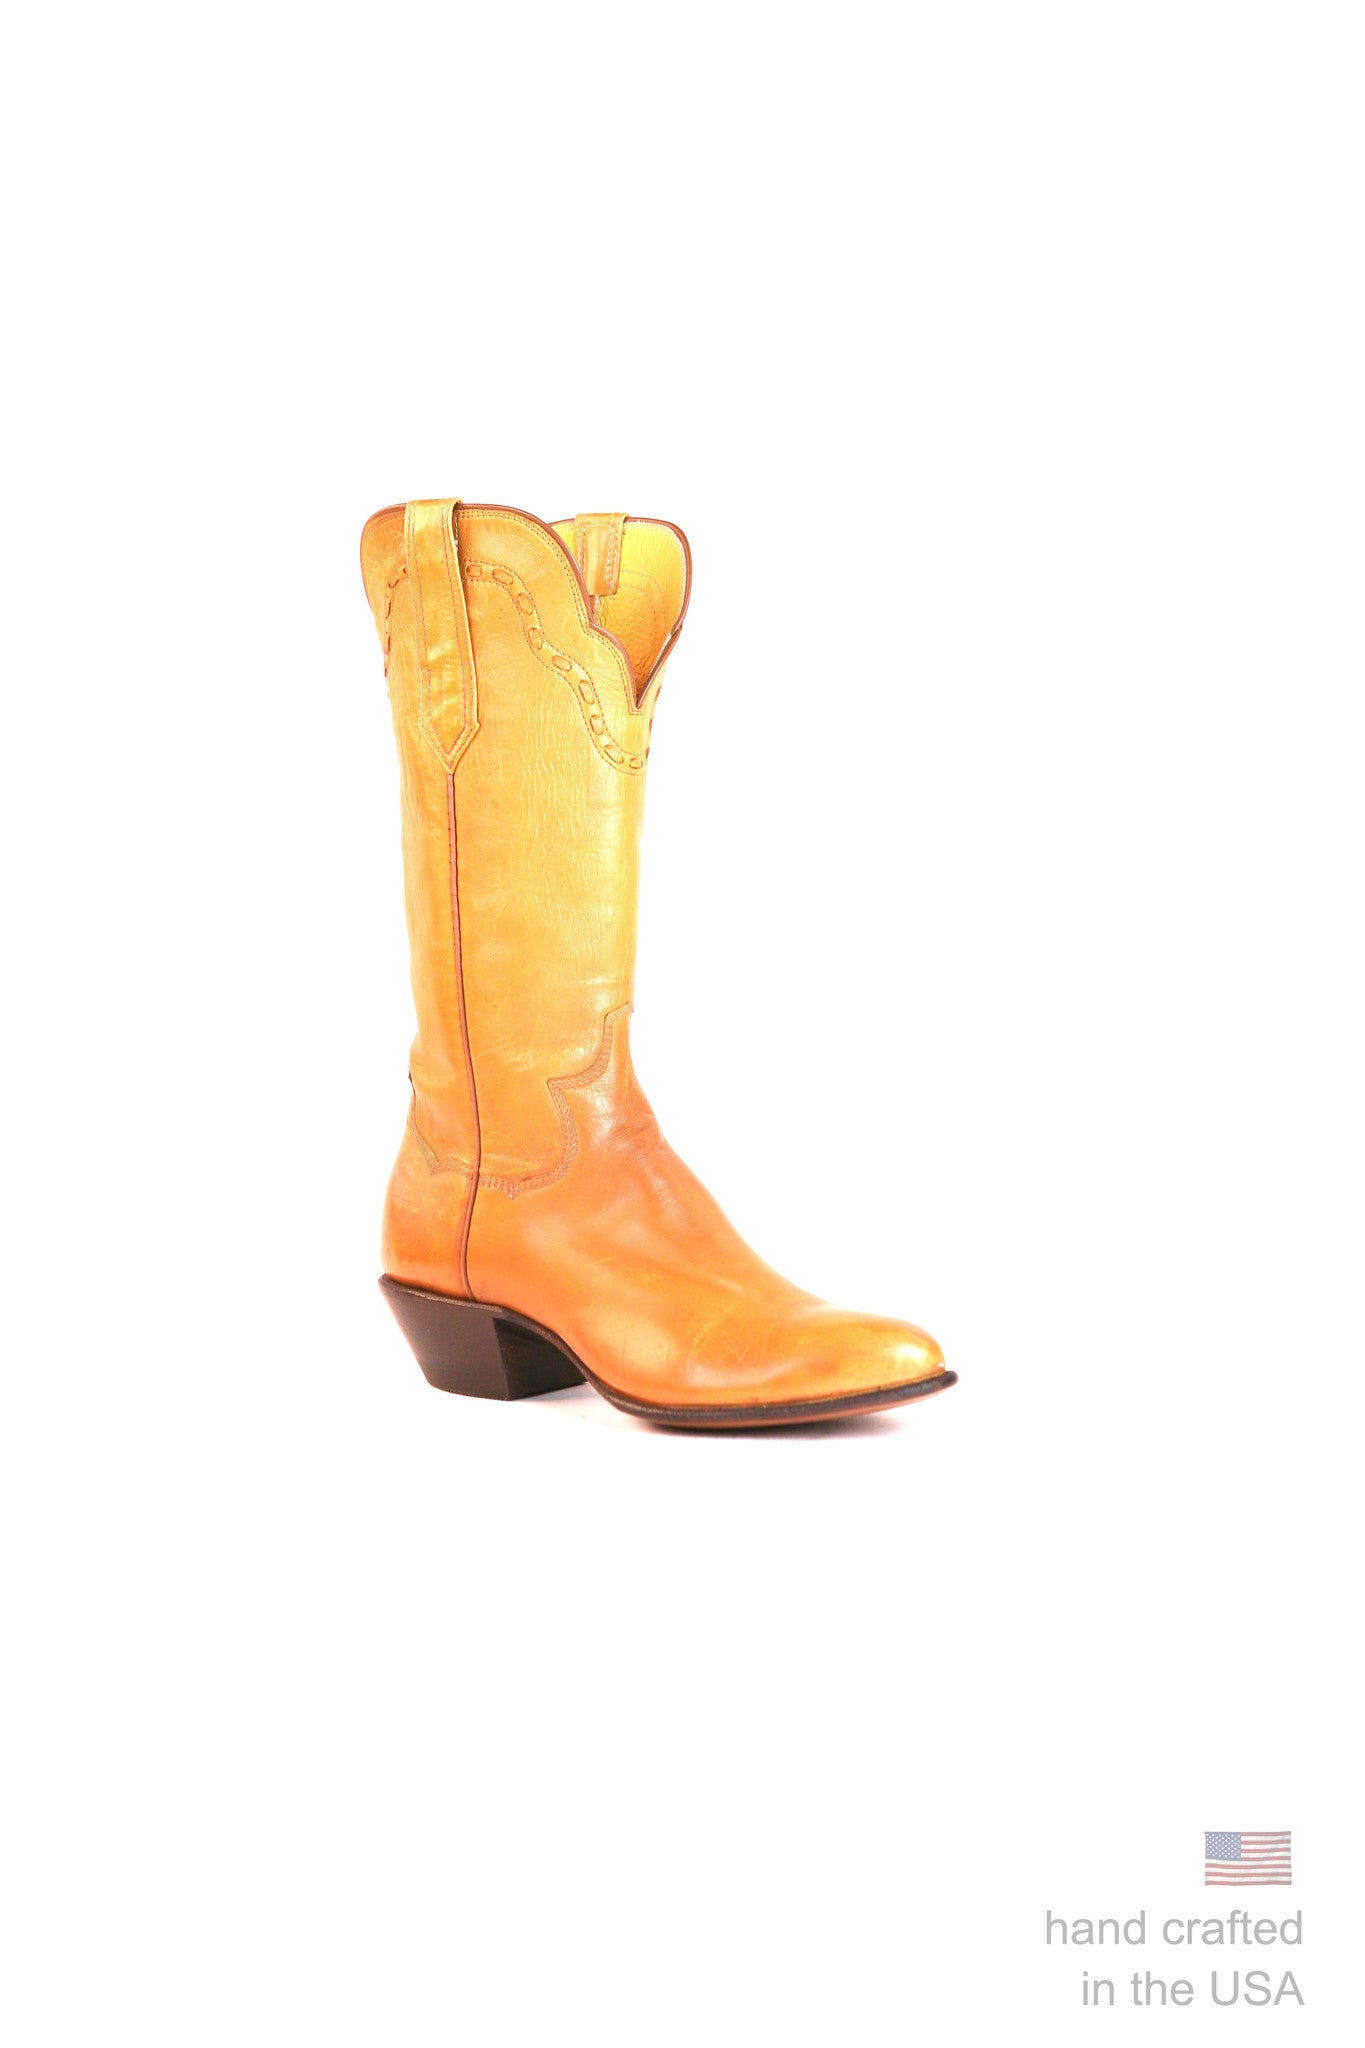 Singles: Boot 0071: Size 5.5 A